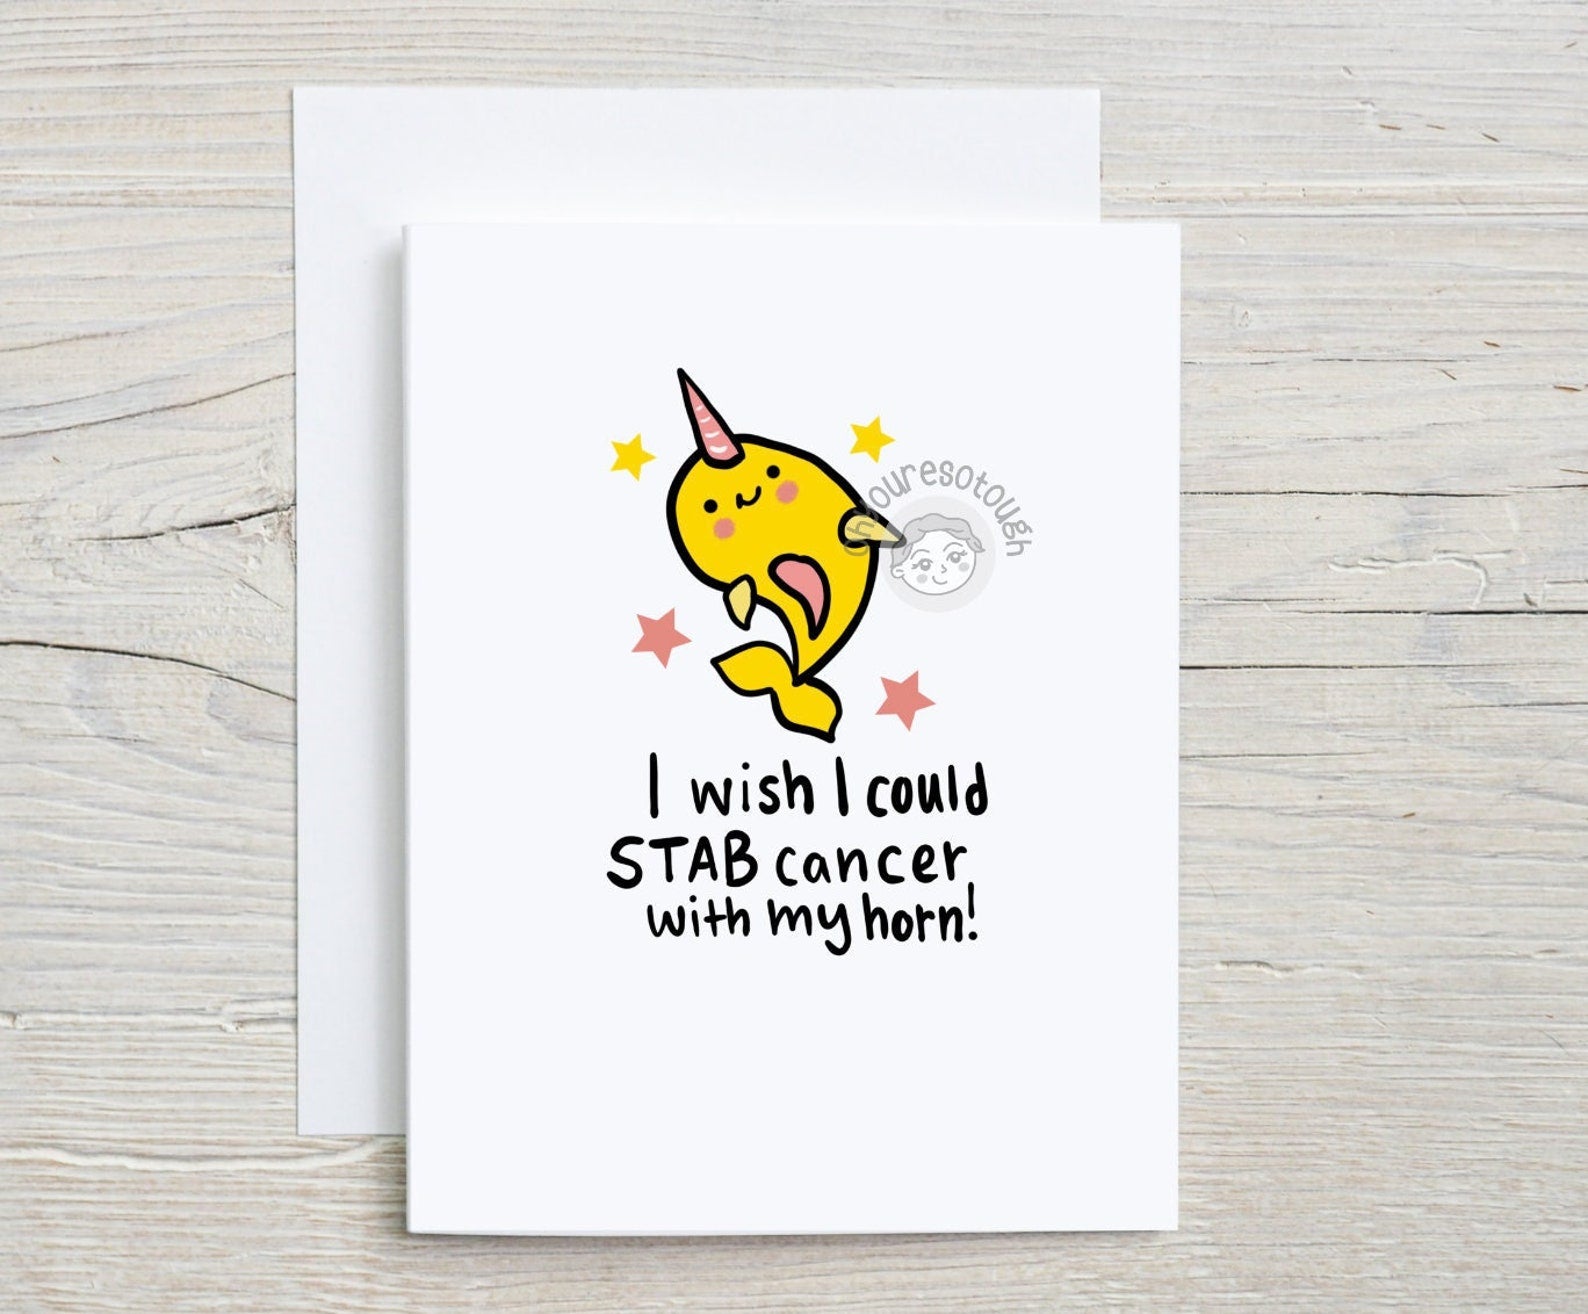 Cancer Encouragement Card Funny - Stab Cancer with Horn - Cancer Support - Cancer Card - End of Chemo Card - Cancer Survivor CardCancer Encouragement Card Funny - Stab Cancer with Horn - Cancer Support - Cancer Card